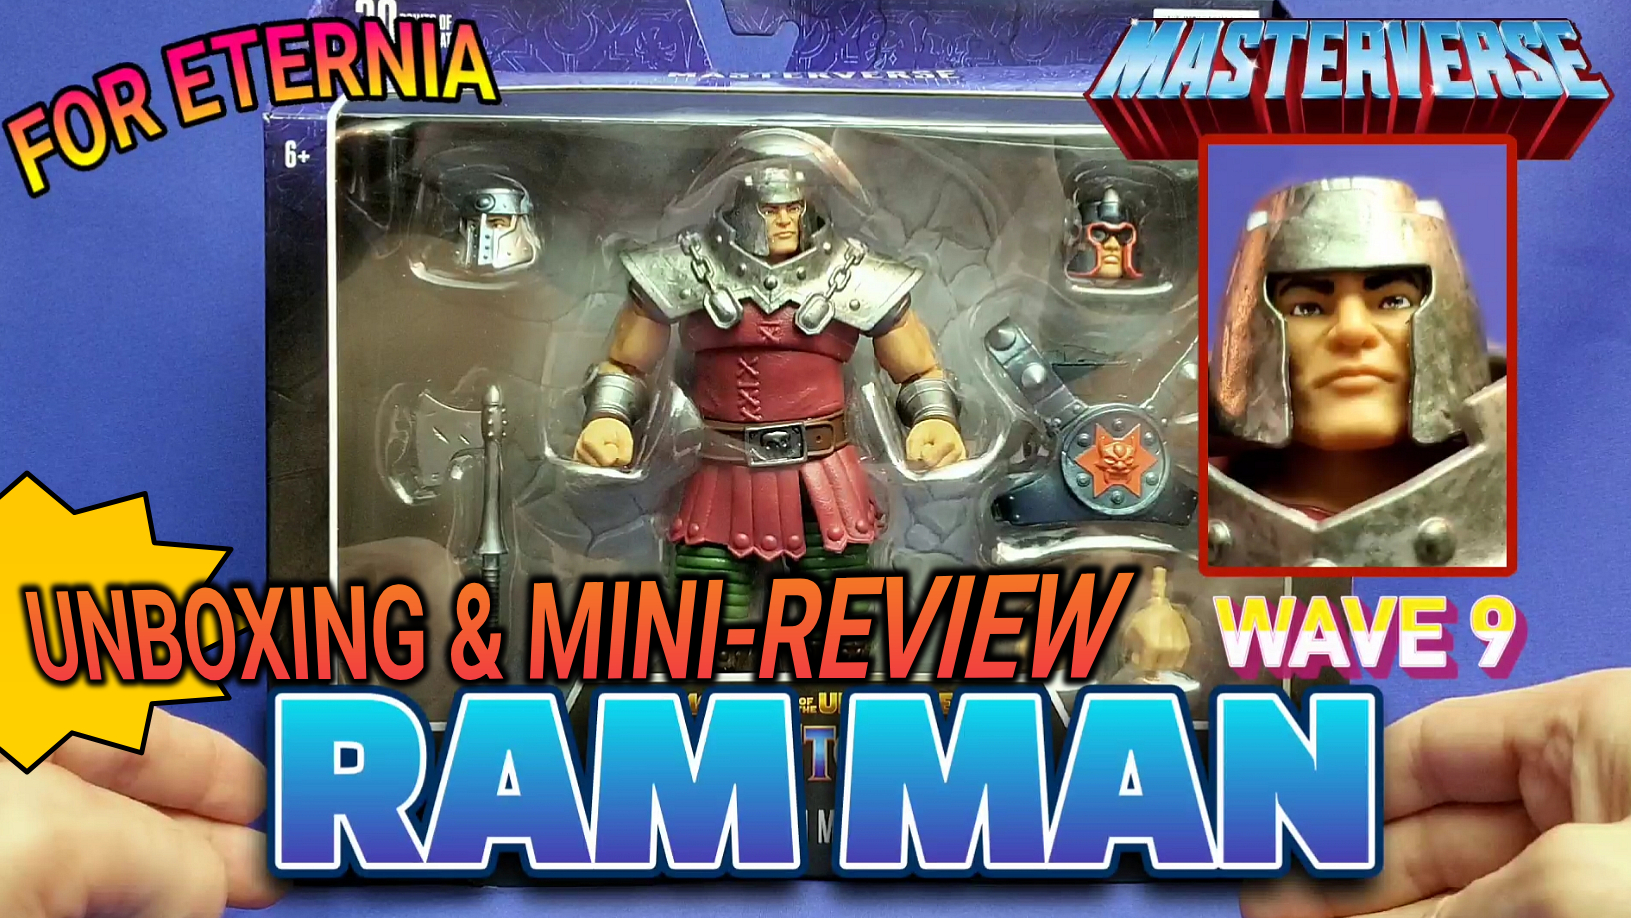 Watch our UNBOXING & REVIEW of the MASTERVERSE Ram Man Wave 9 New Eternia Figure